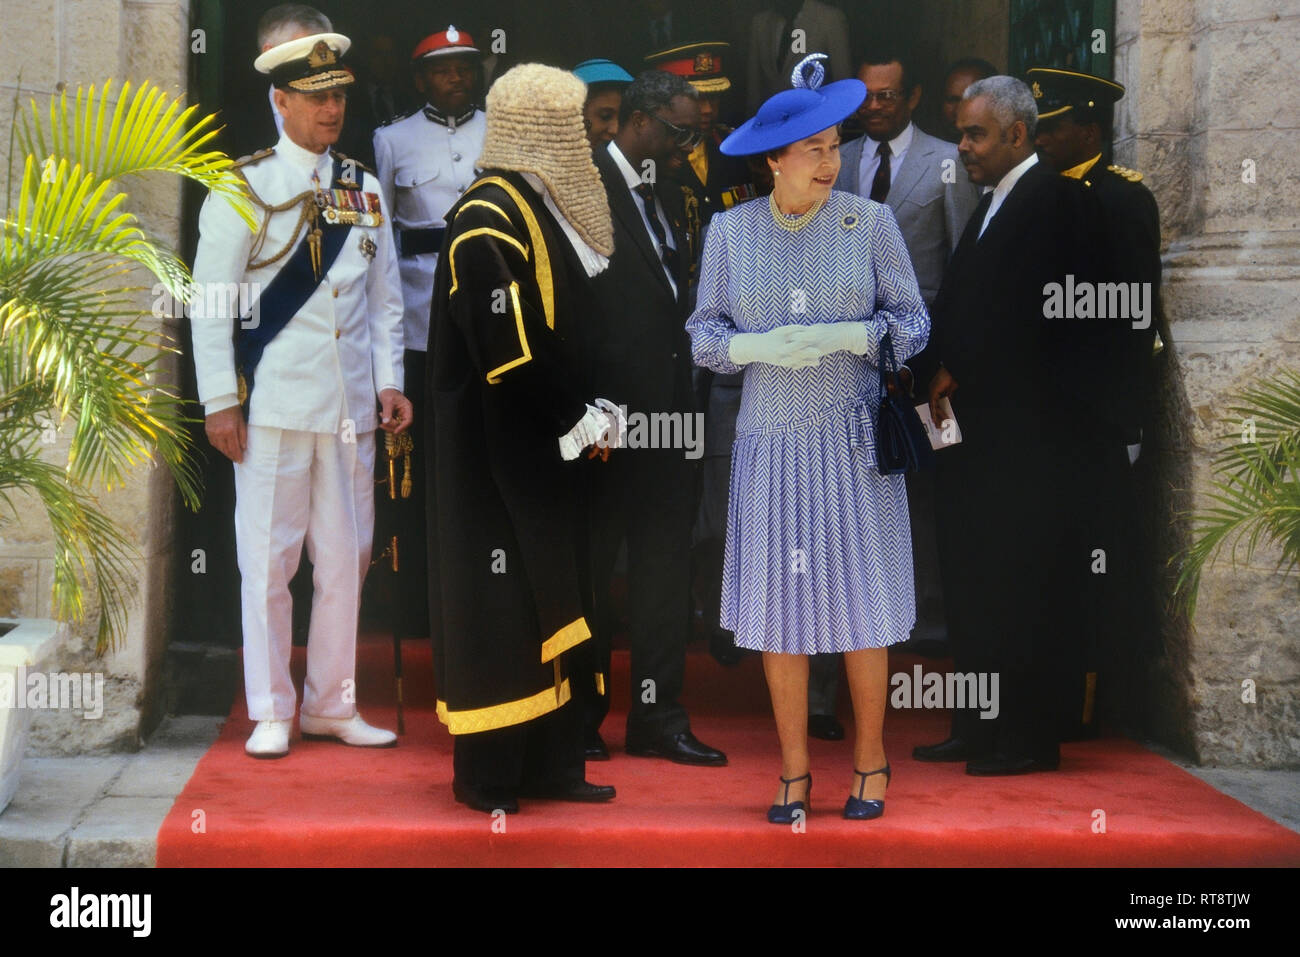 HM Queen Elizabeth II and Prince Philip accompanied by the Speaker of the House, Lawson Weekes, on a royal visit to mark the 350th anniversary of the Barbados Parliament, Bridgetown. 8-11th March 1989 Stock Photo